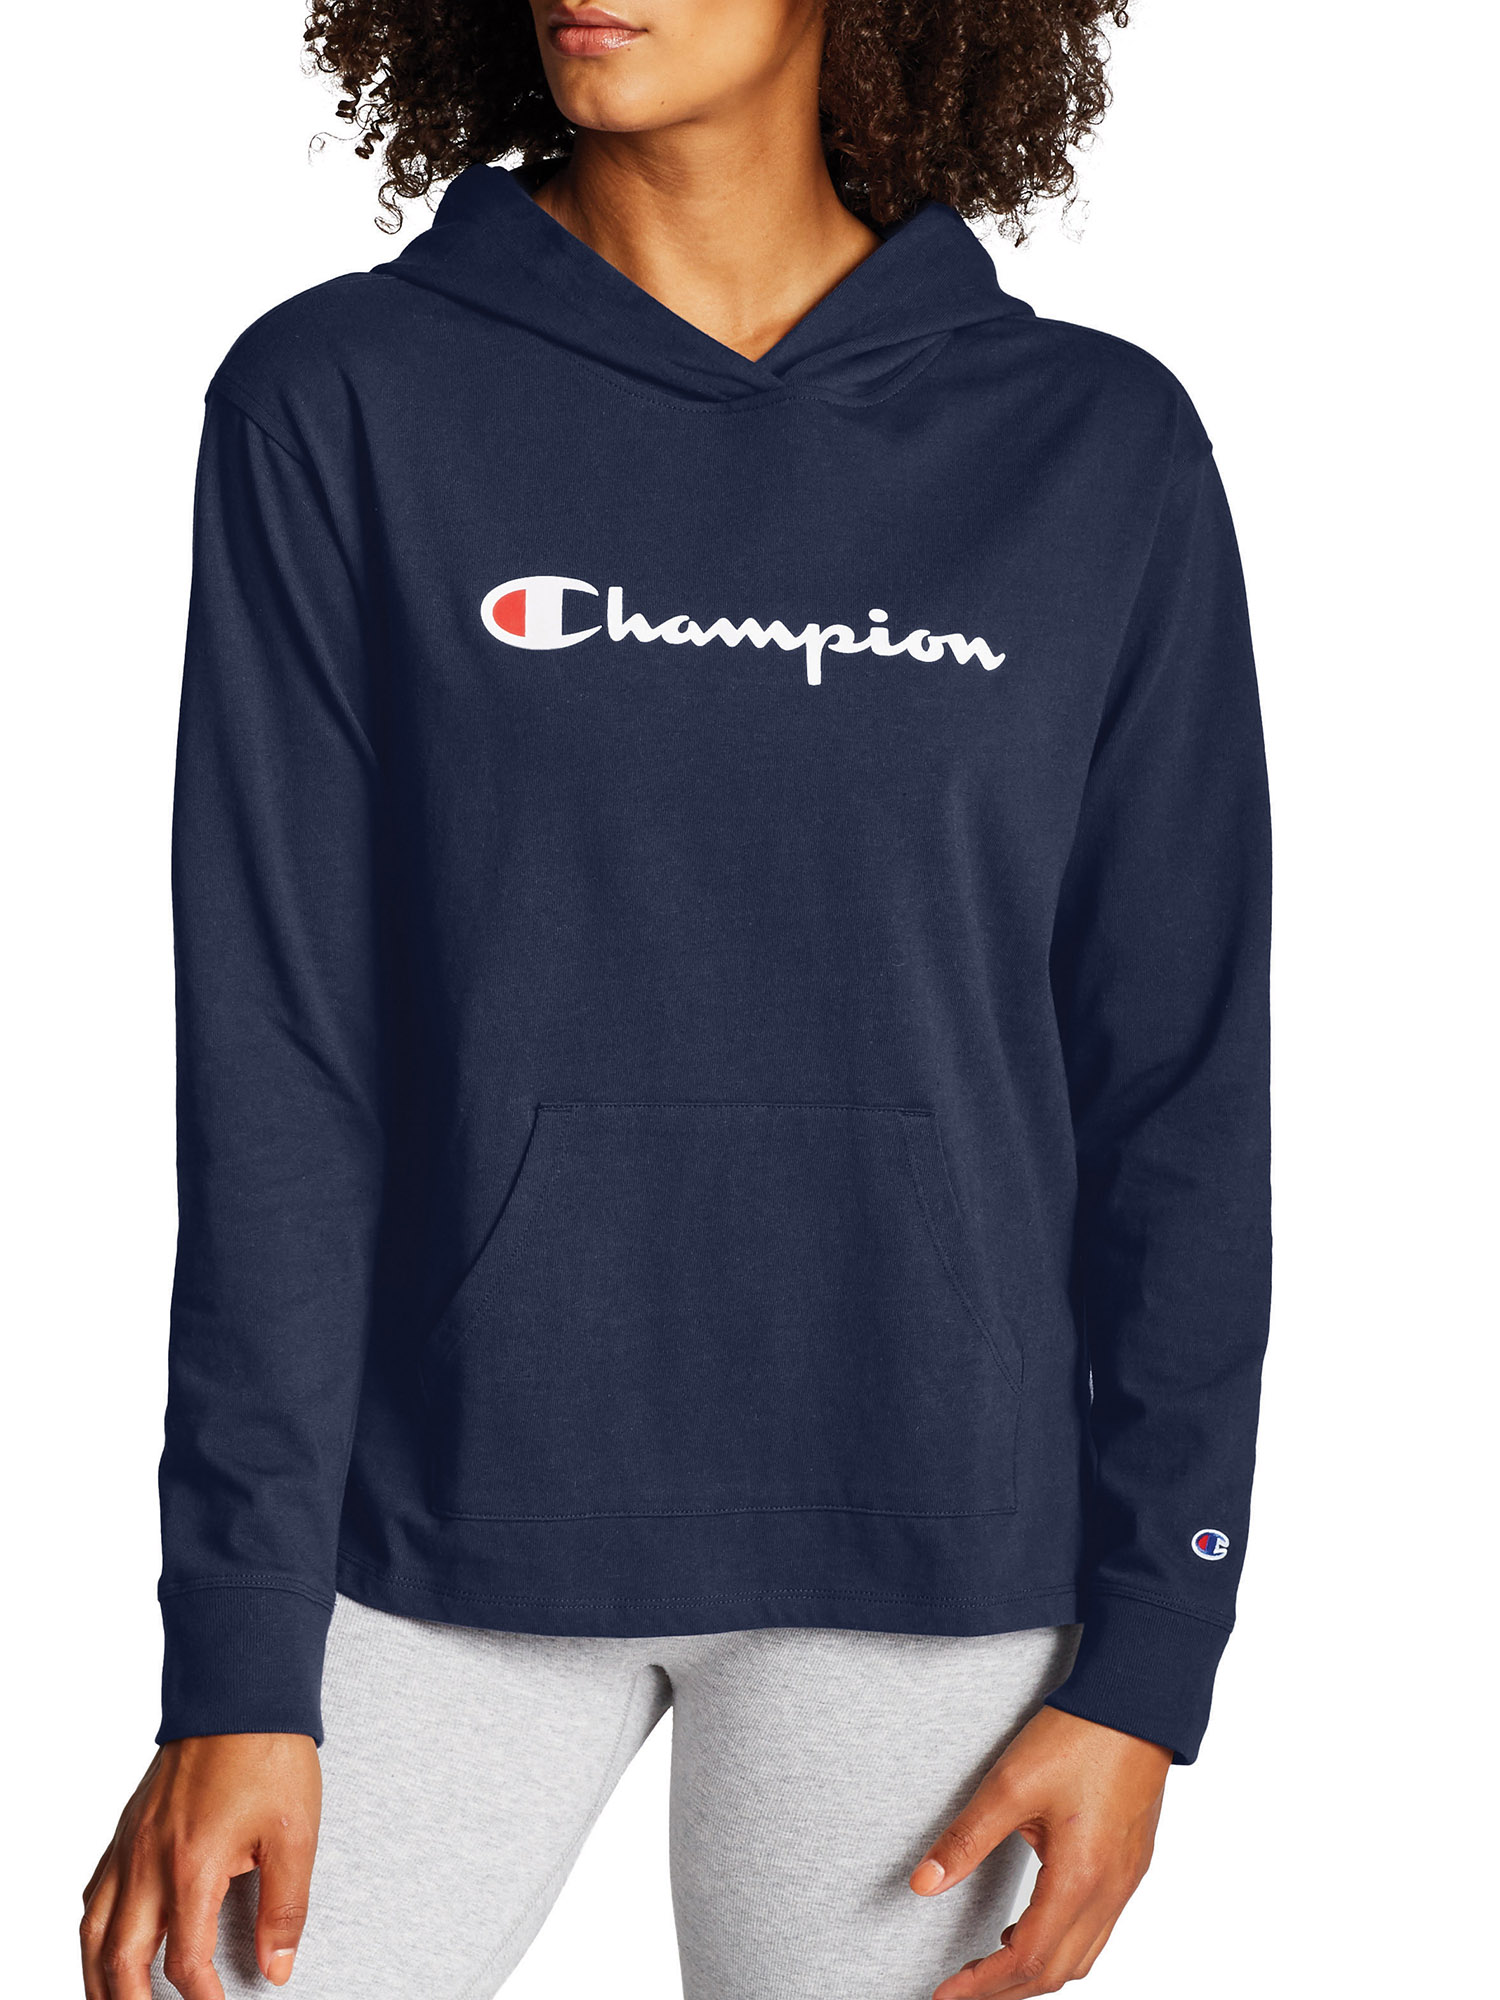 Champion Women's Middleweight Jersey Pullover Hoodie - image 1 of 5